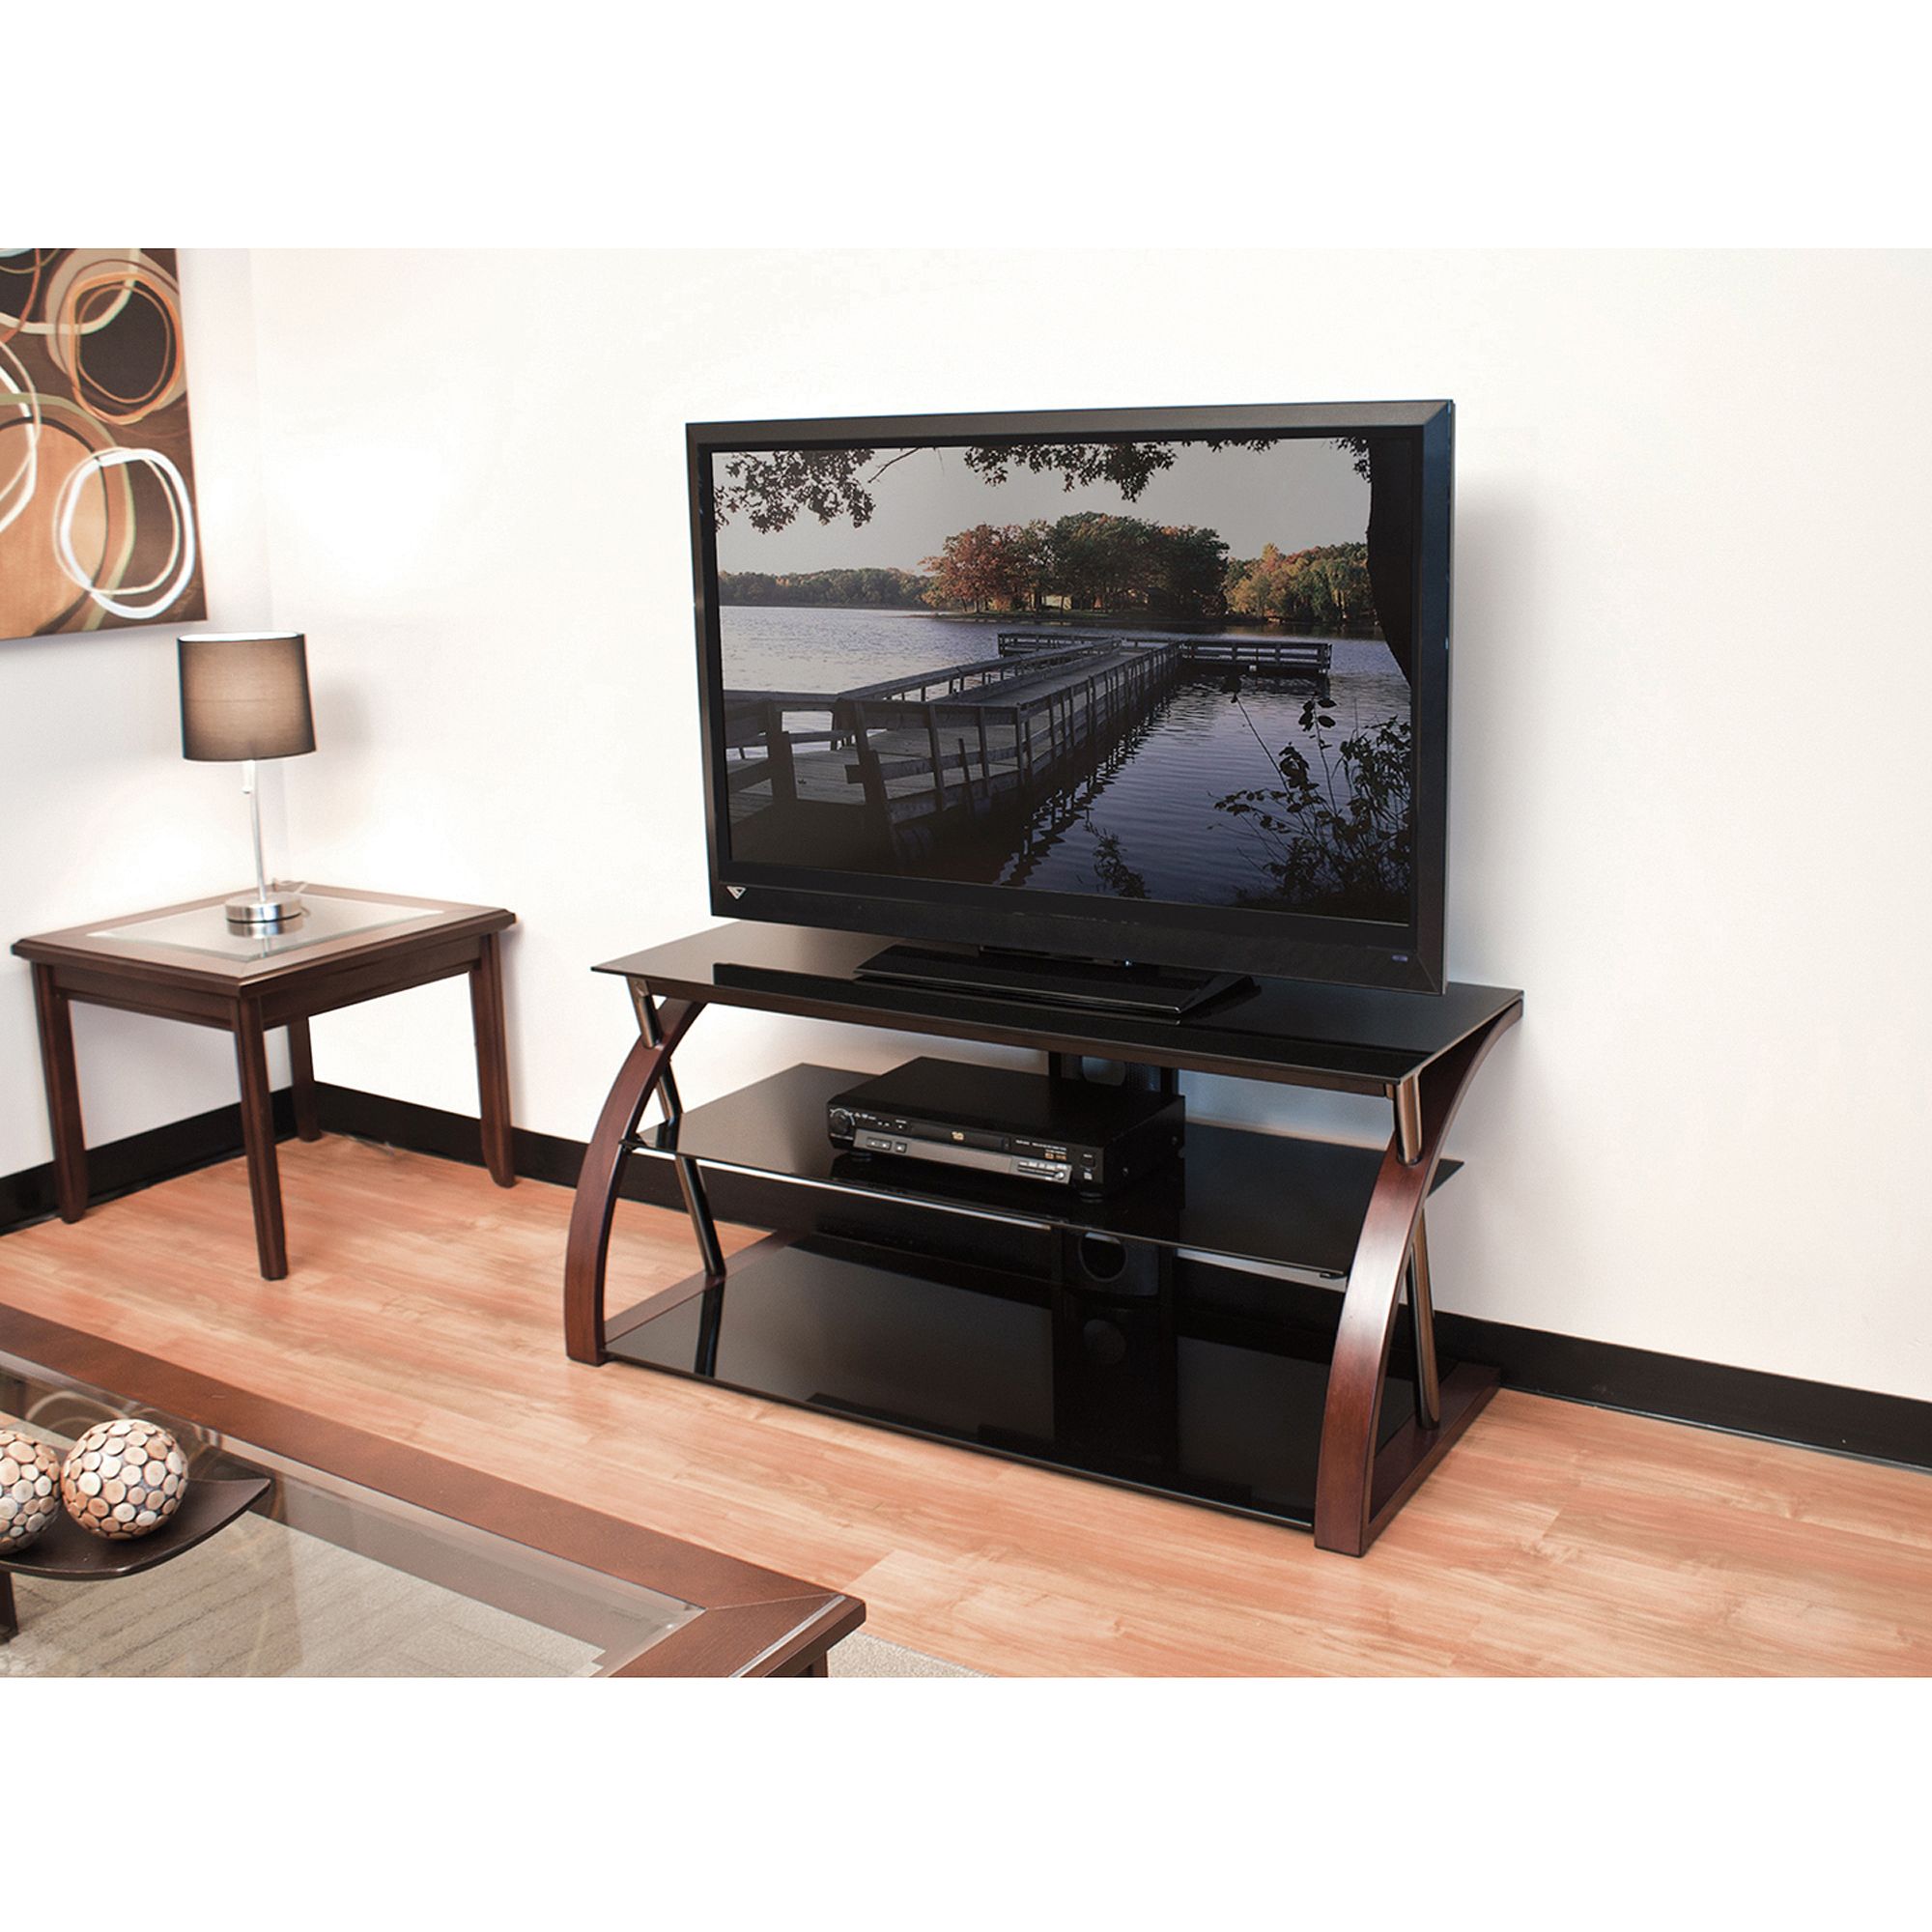 Preferred Sahika Tv Stands For Tvs Up To 55" Regarding Techcraft 48" Wood, Metal And Glass Tv Stand For Tvs Up To (View 9 of 25)